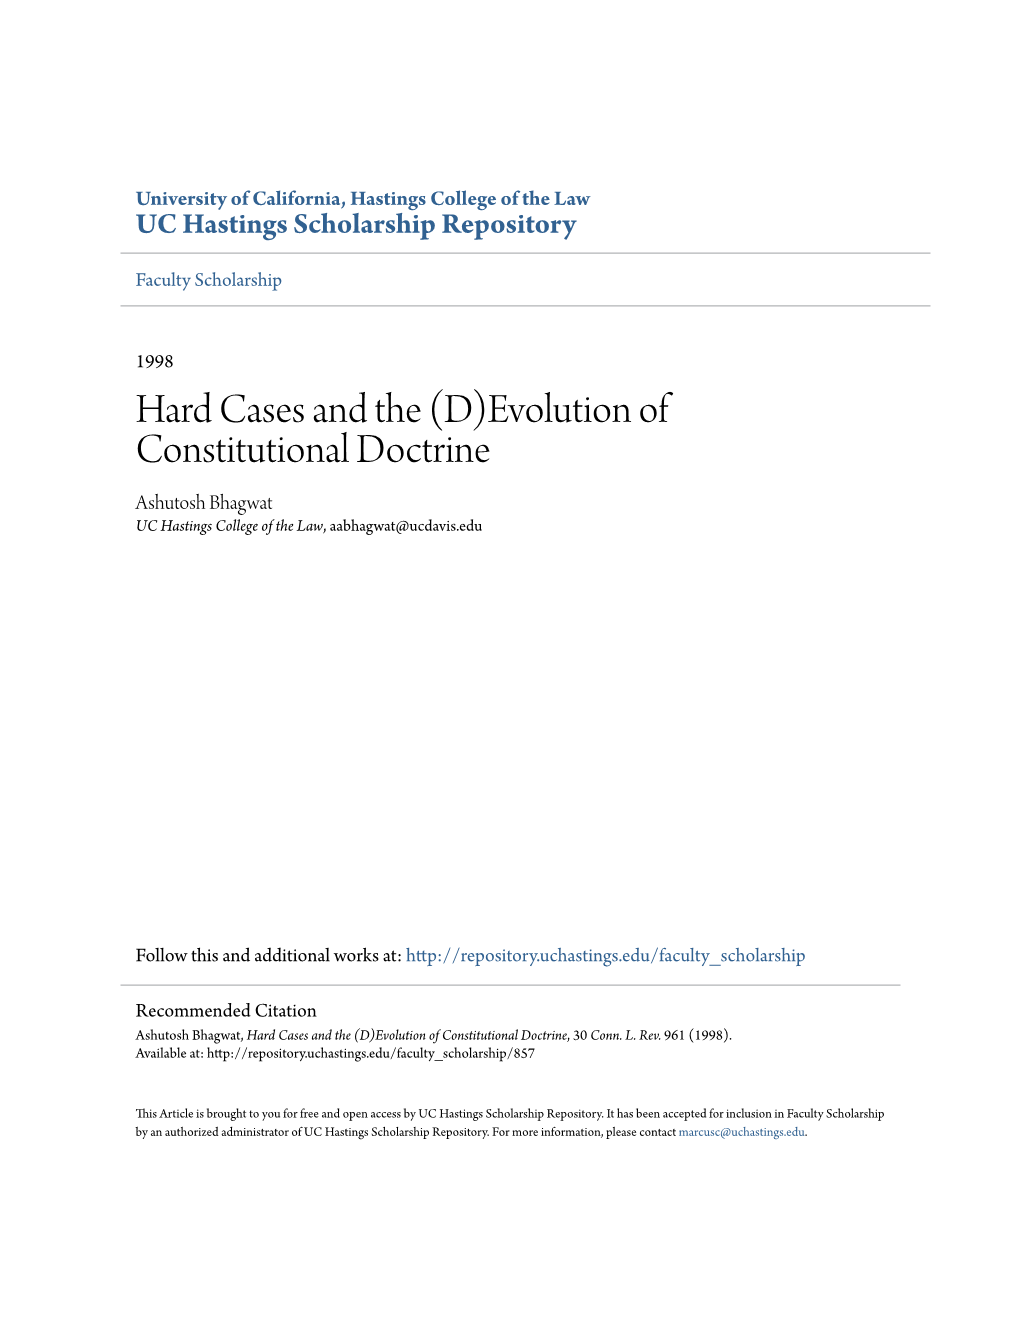 Hard Cases and the (D)Evolution of Constitutional Doctrine Ashutosh Bhagwat UC Hastings College of the Law, Aabhagwat@Ucdavis.Edu